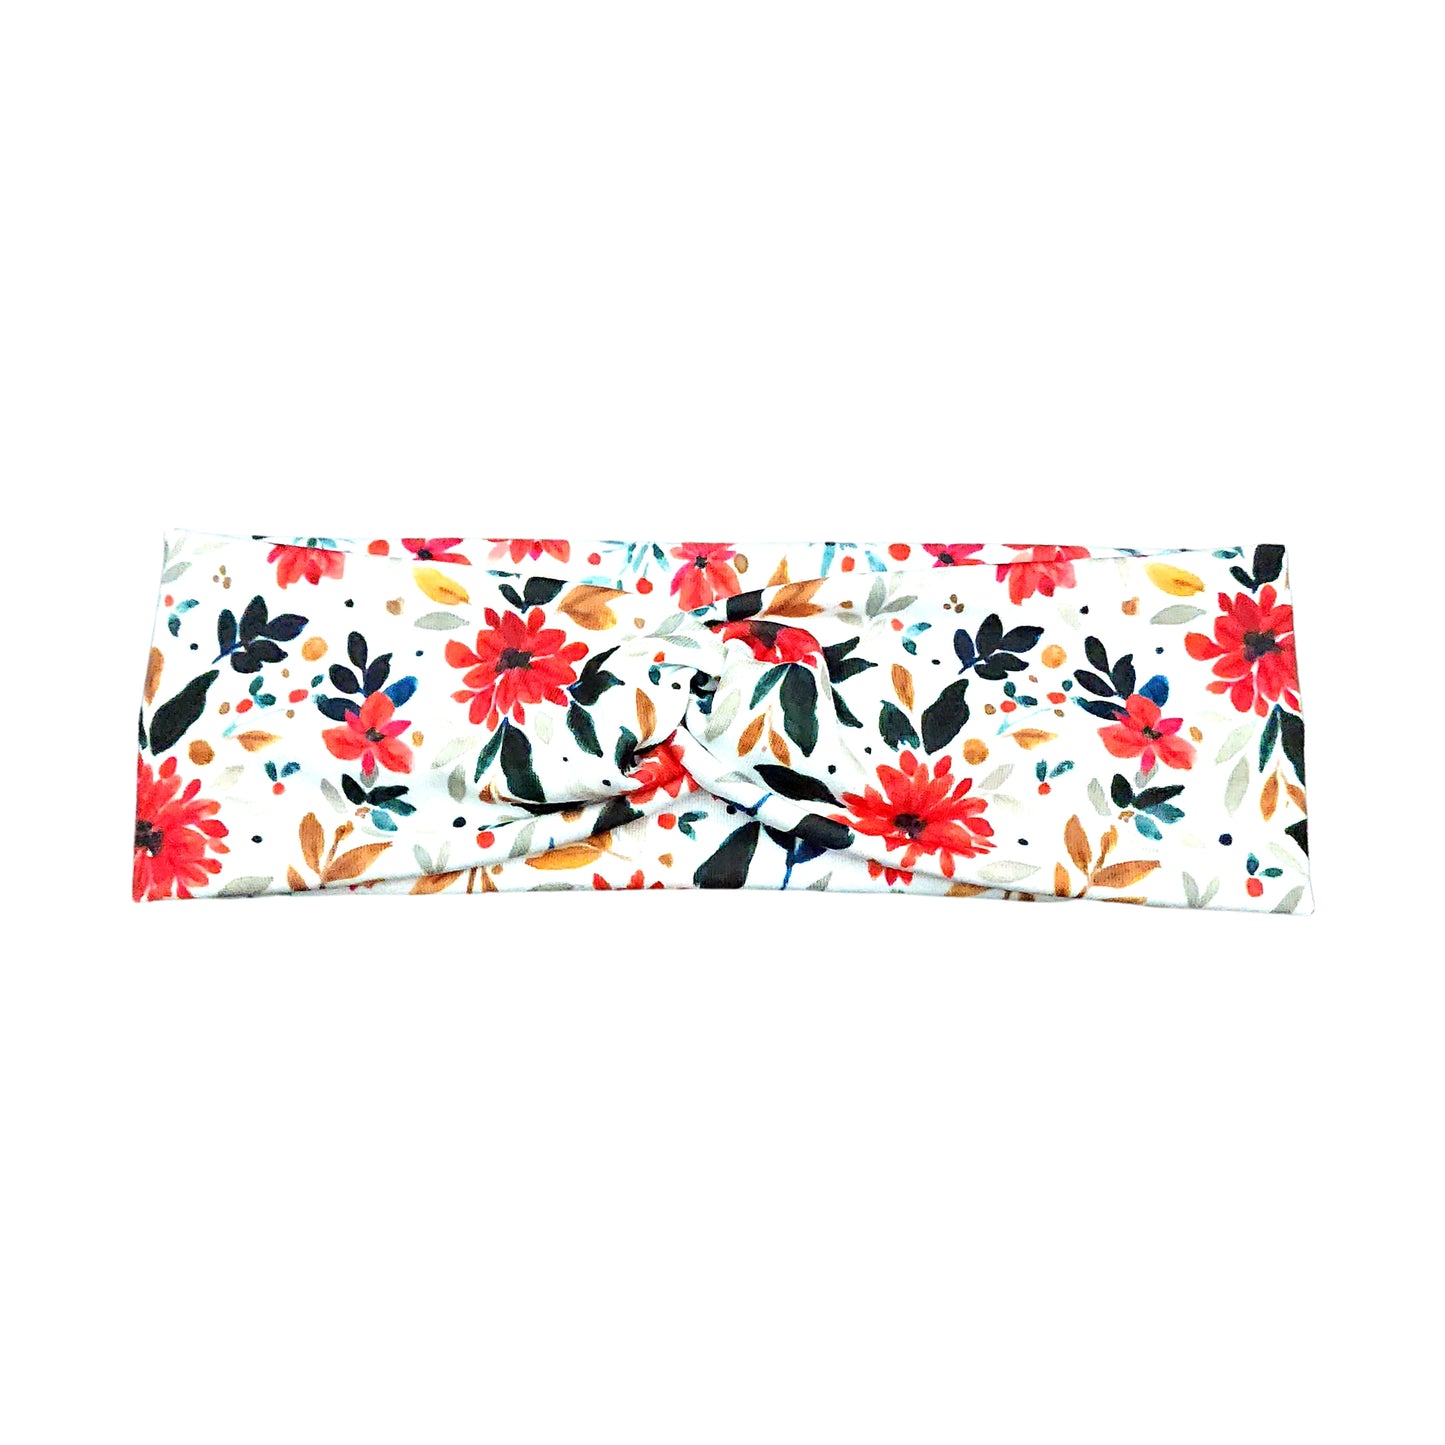 Wide Red Holiday Flower Headband for Women